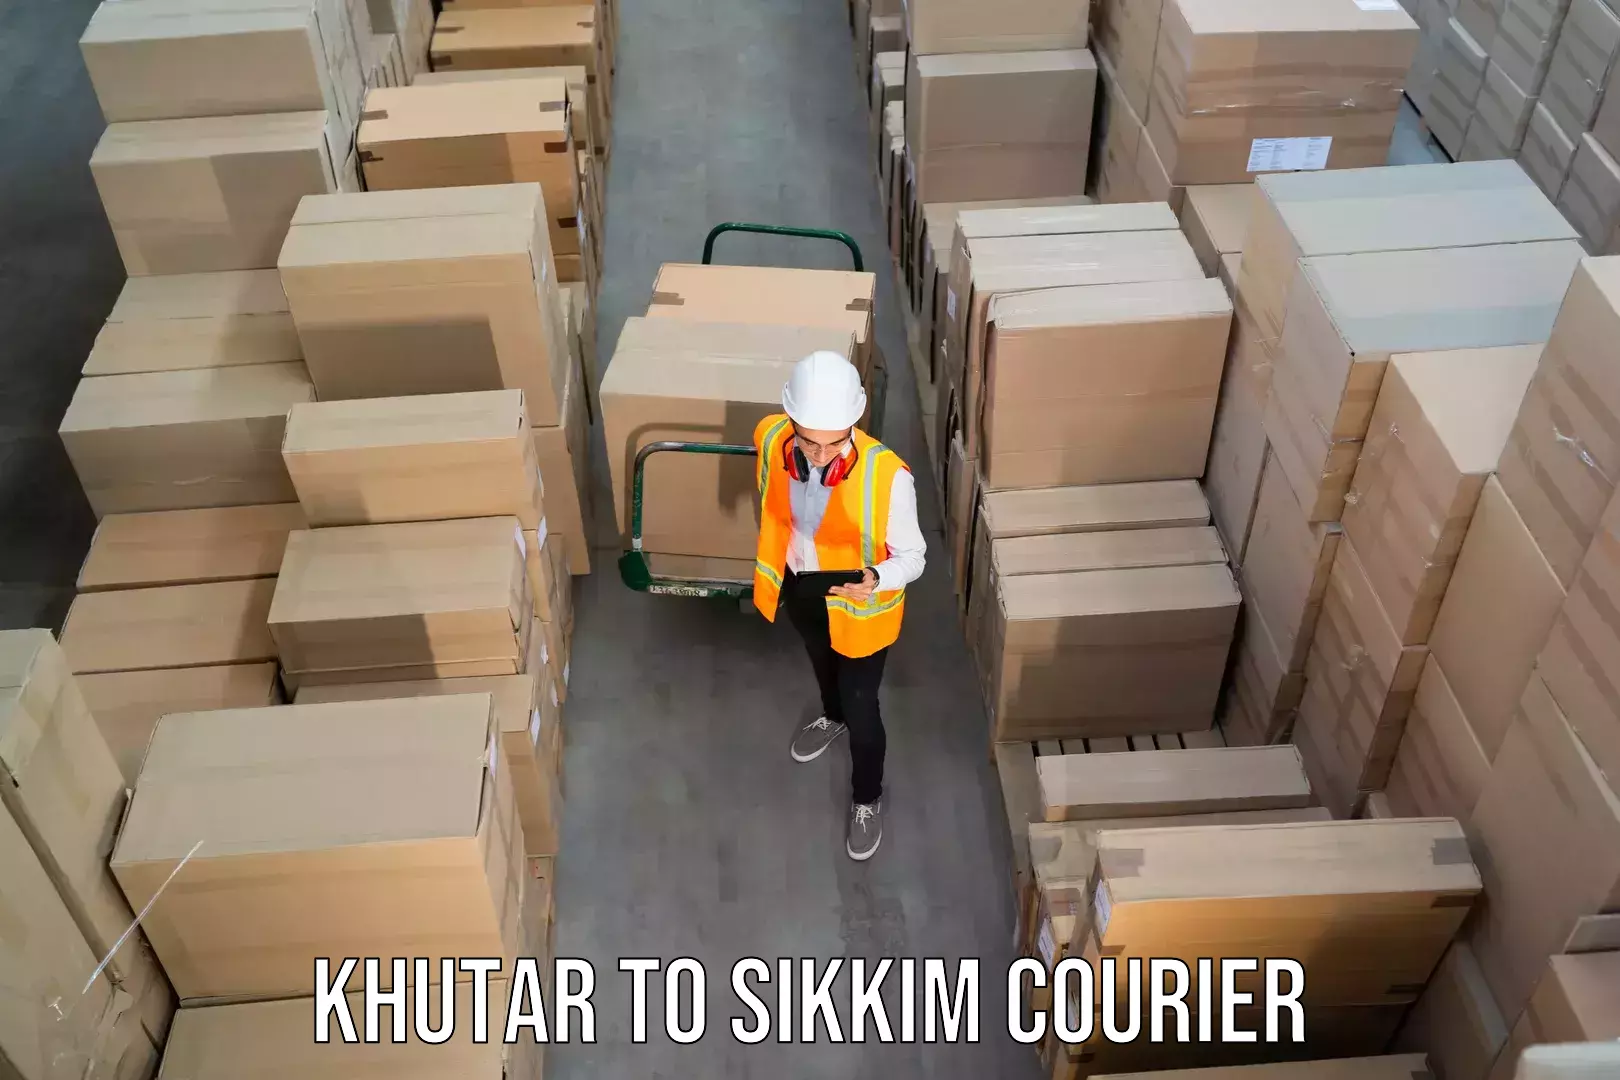 24/7 courier service Khutar to Rangpo